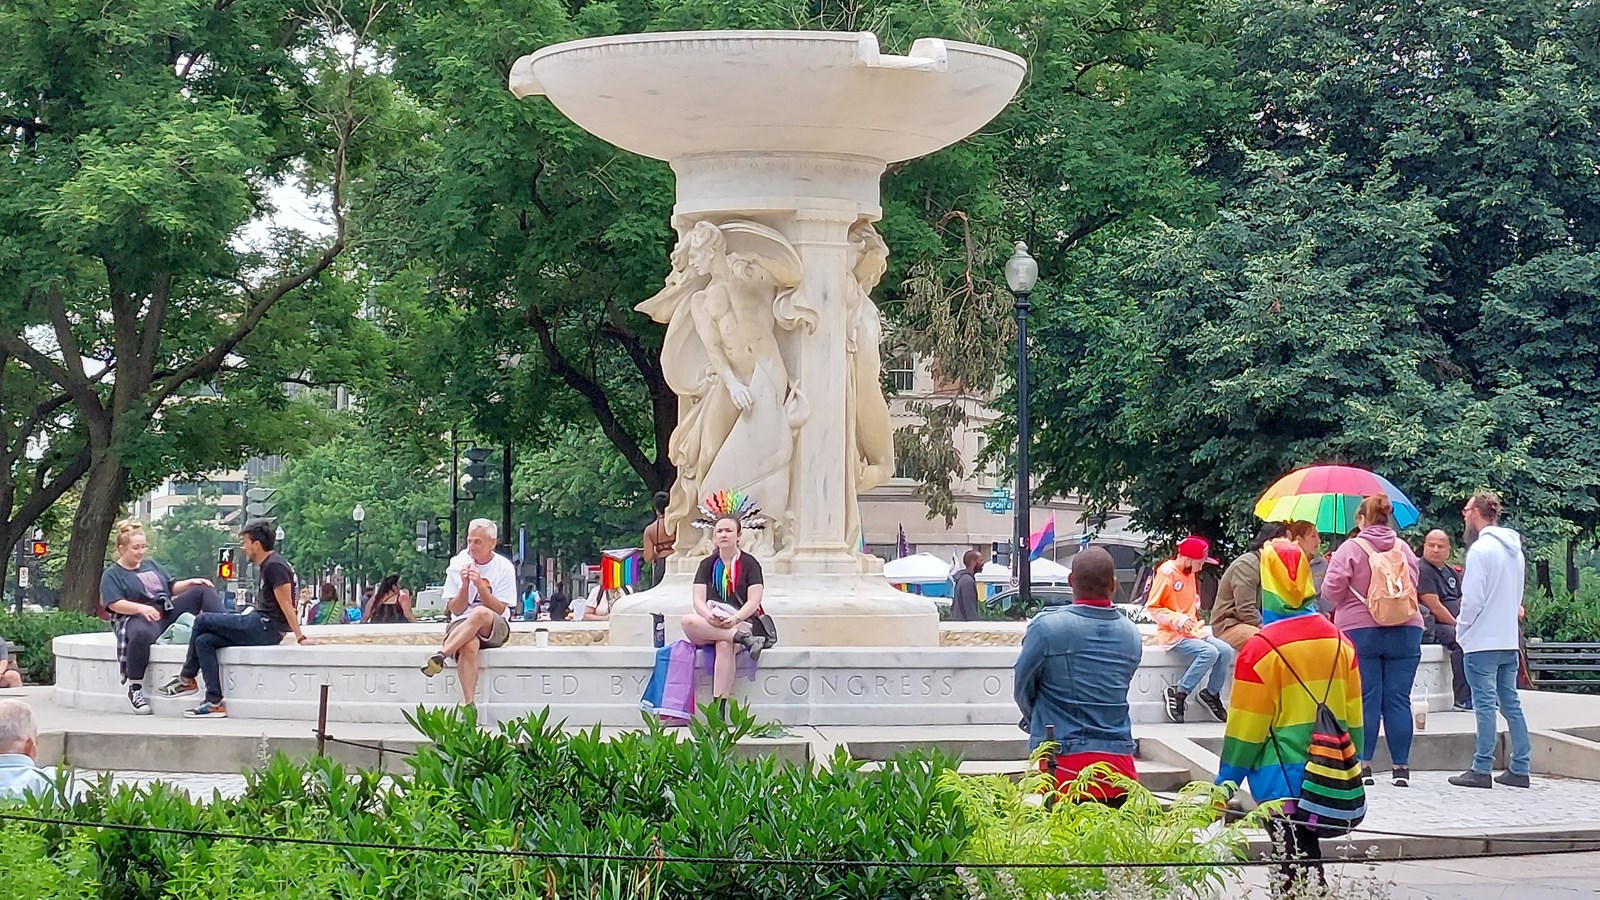 Fifteen people, some wearing rainbow accessories sitting and standing at the Dupont Circle fountain